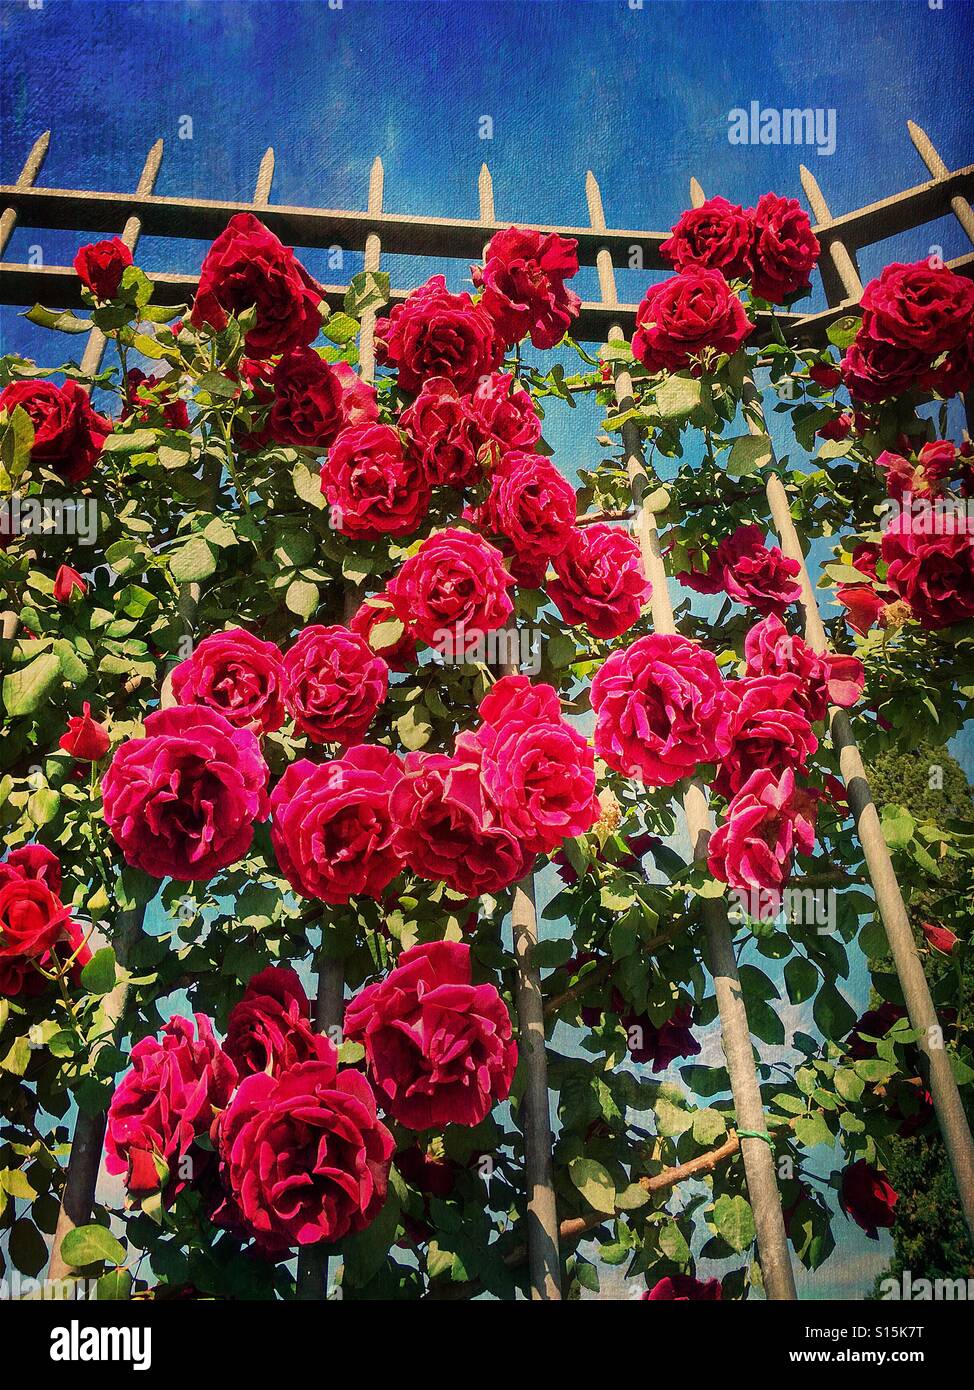 Beautiful red roses at the Roseto Comunale garden in Ripa, Rome, Italy. Vintage paper texture overlay. Stock Photo